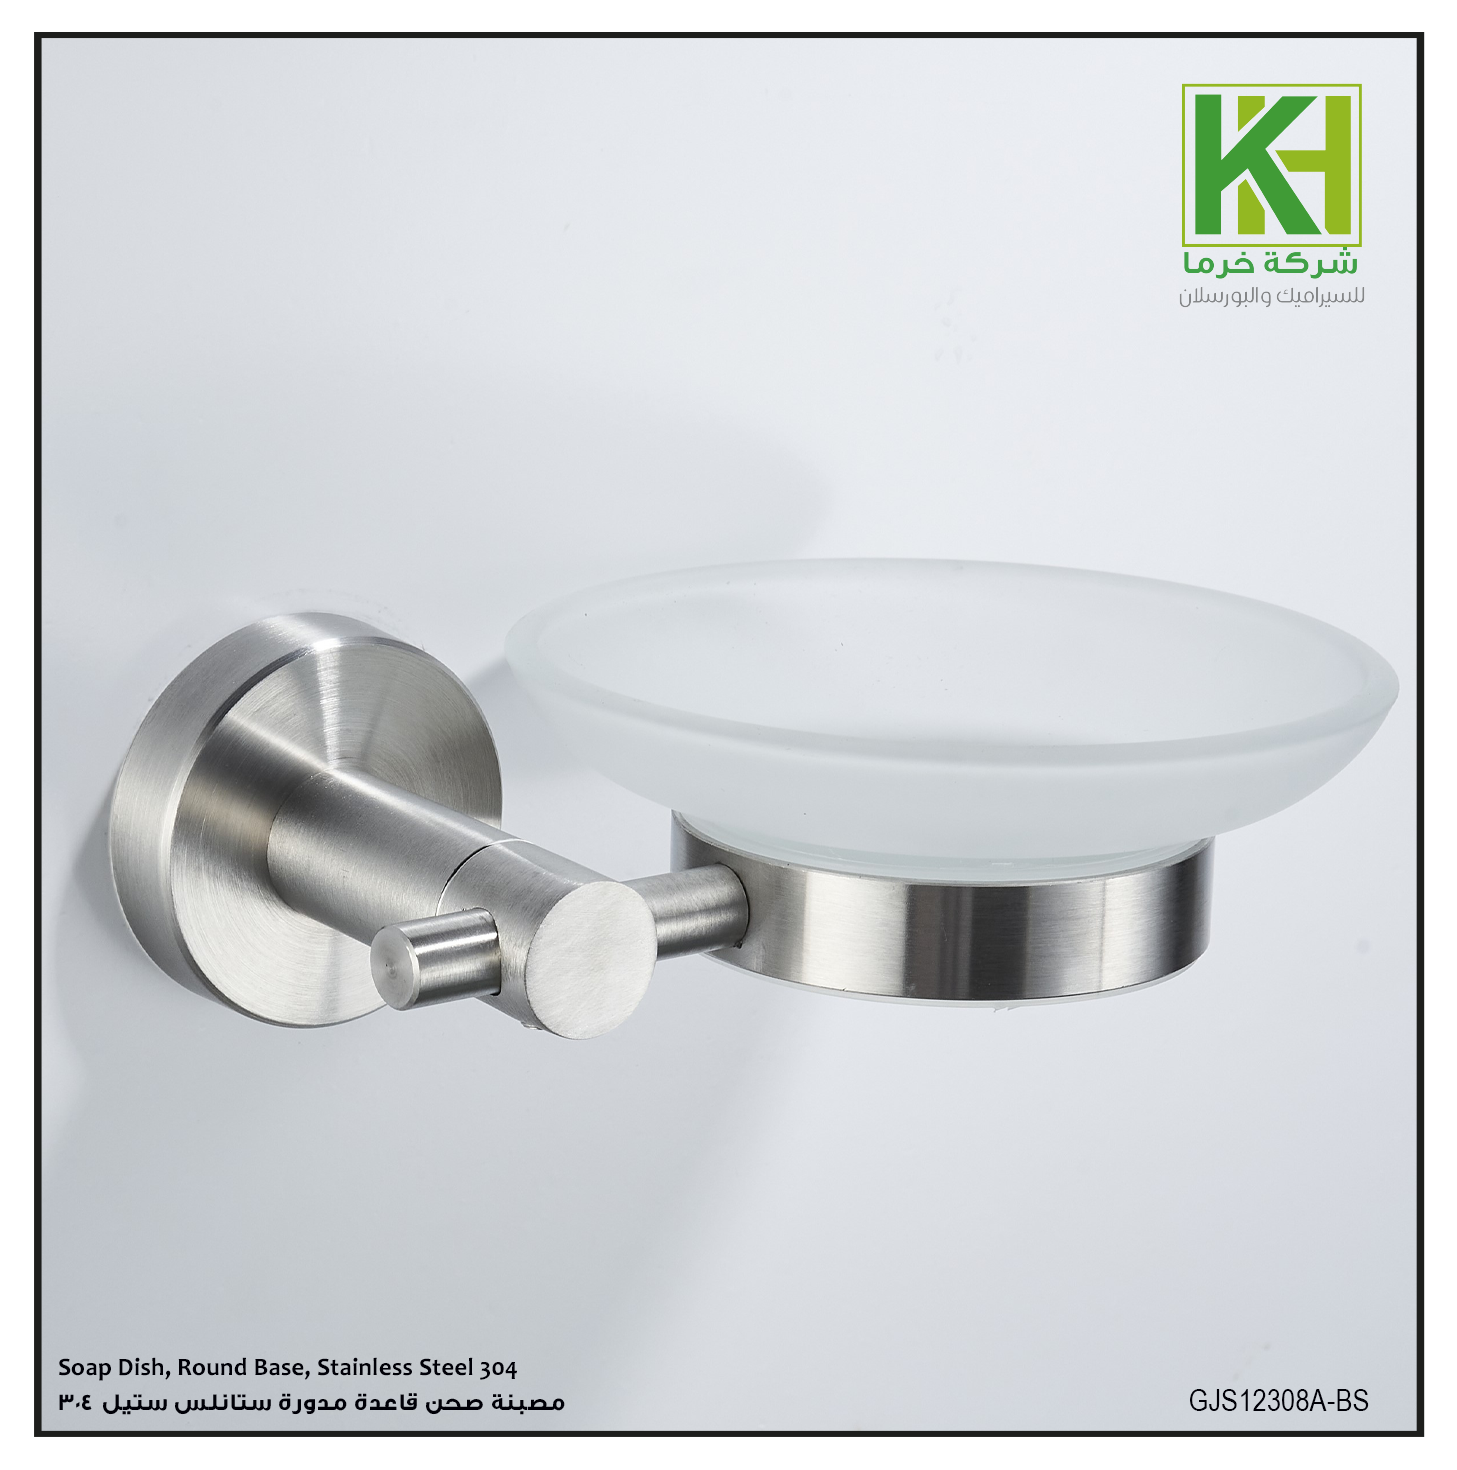 Picture of Soap Dish, Round Base, Stainless Steel 304